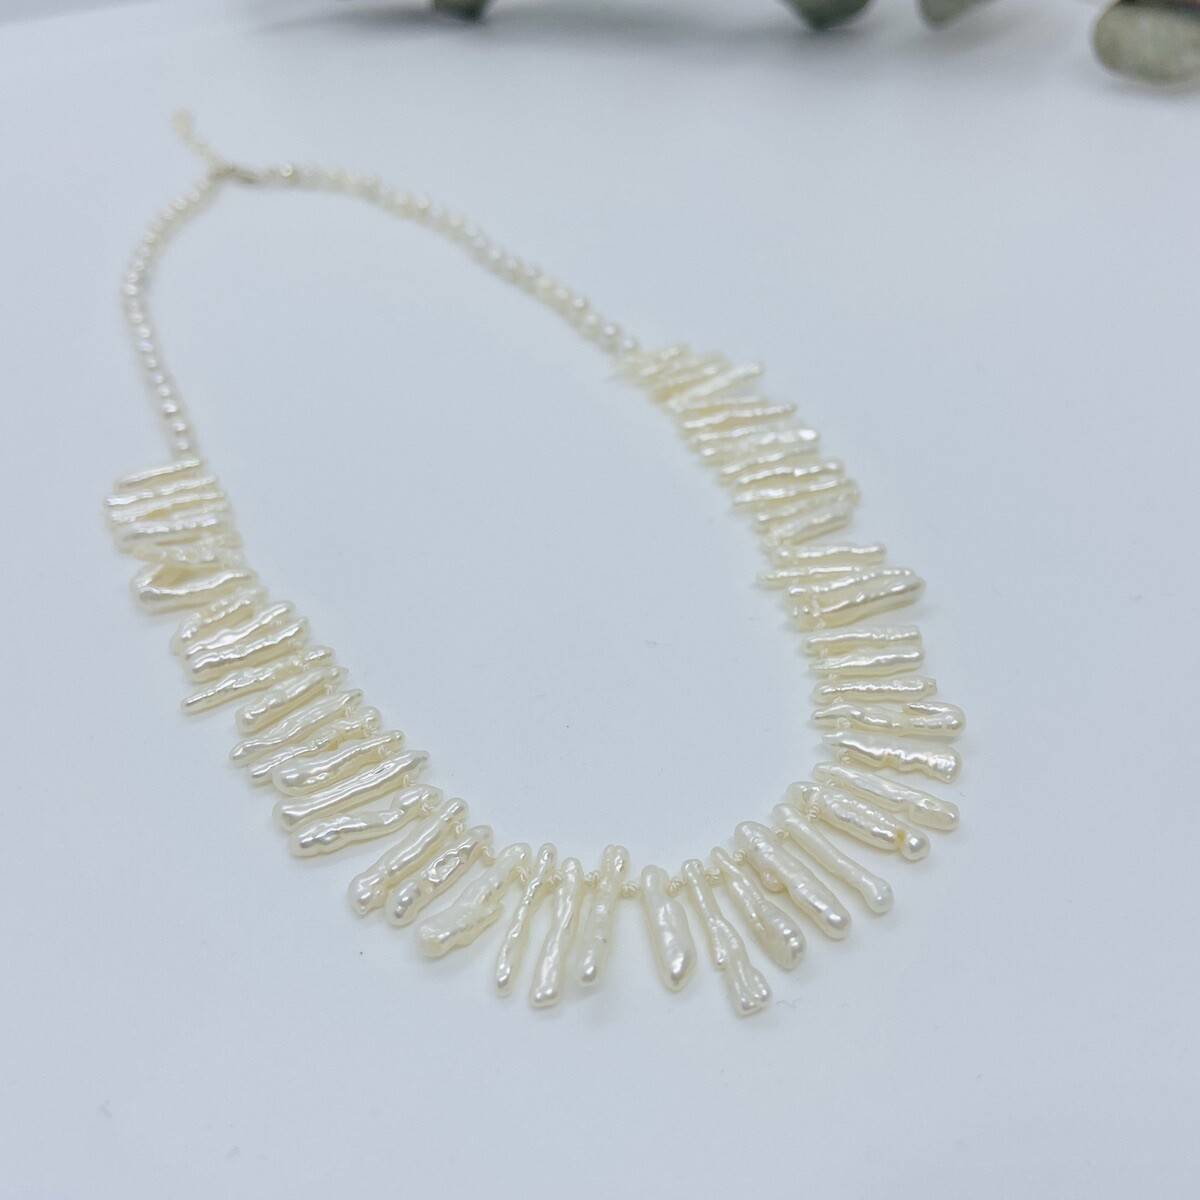 Handmade Necklace with white stick pearls, round knotted on white silk